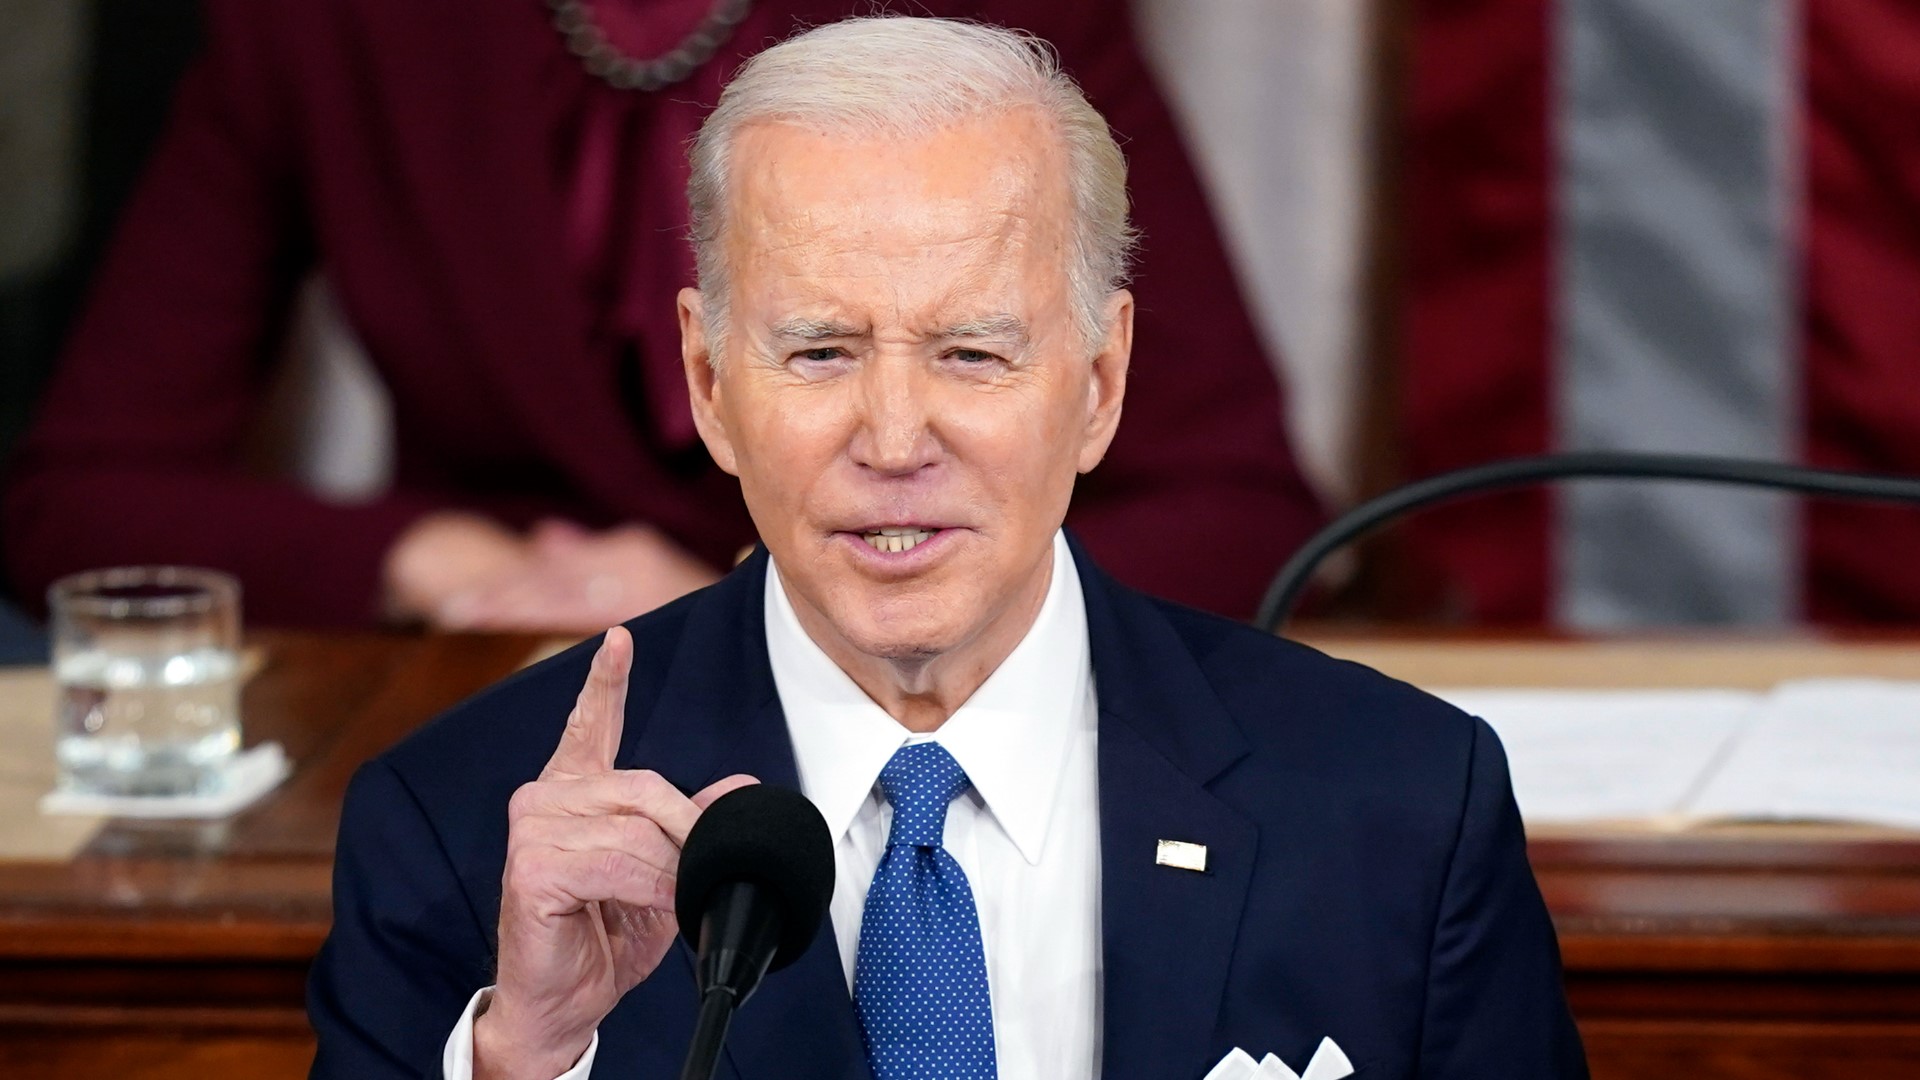 President Biden opened the State of the Union, touting how far the country has come in the last two years.